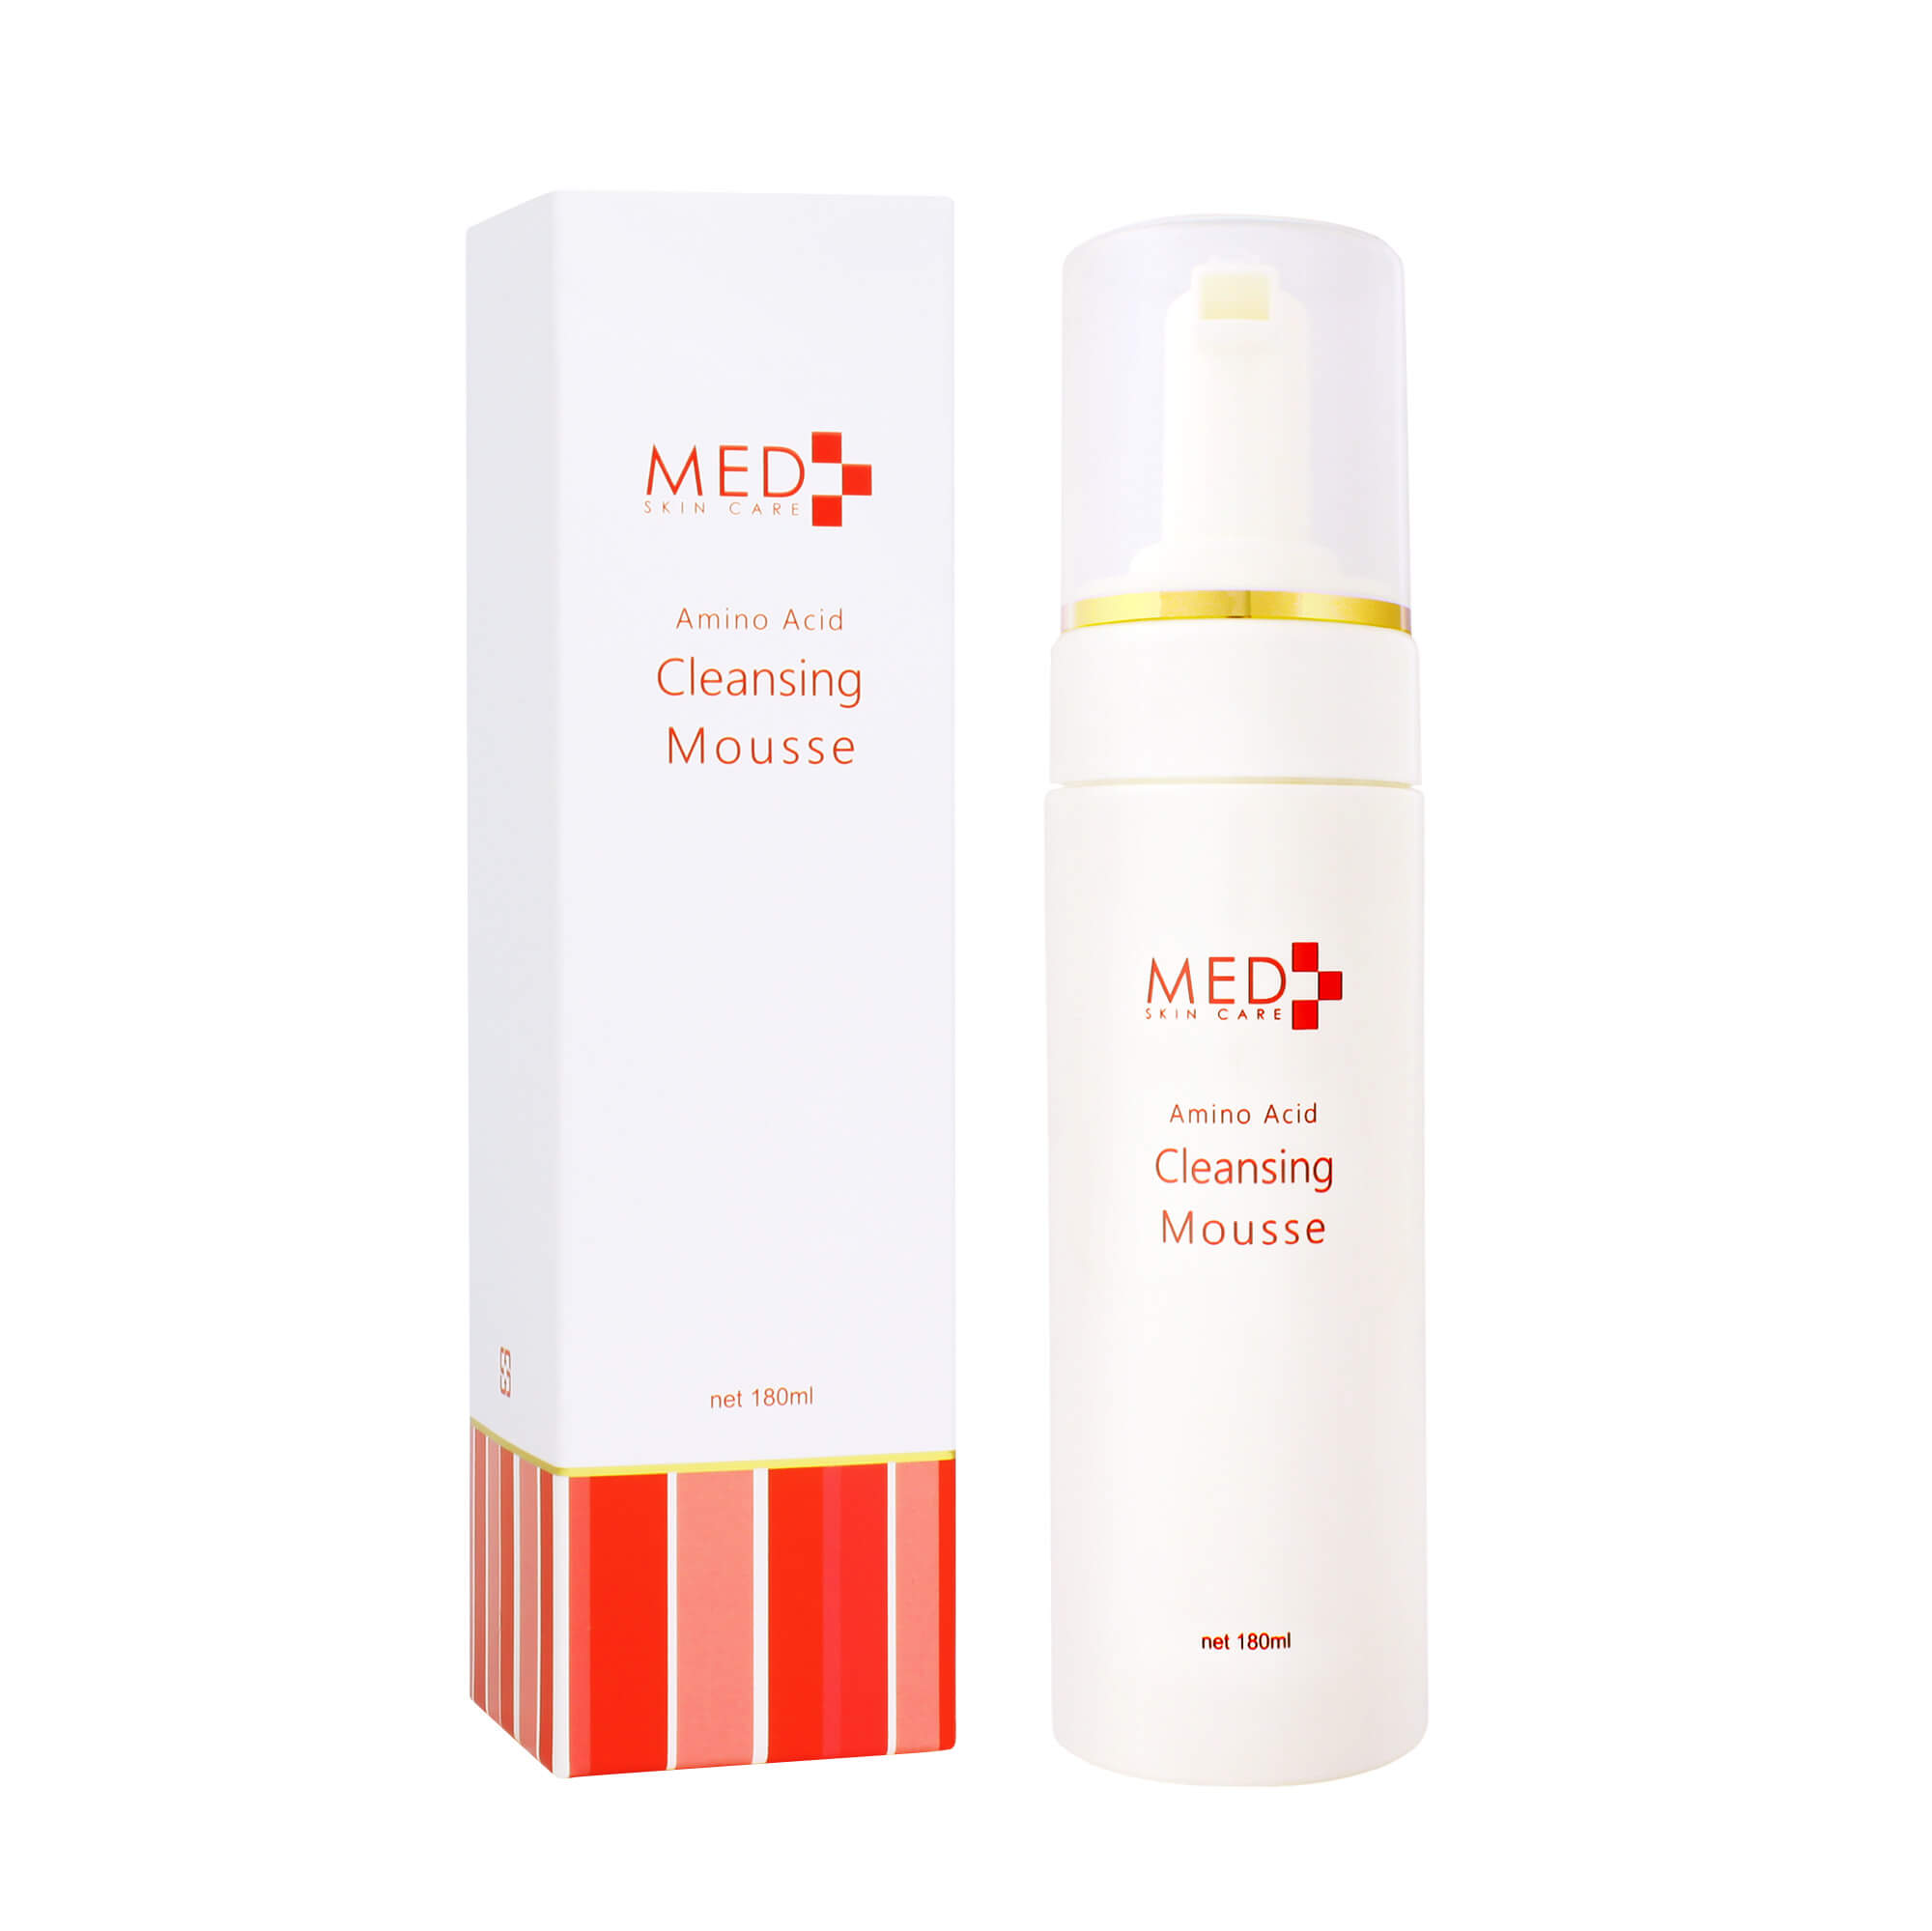 MED Skin Care Amino Acid Cleansing Mousse 180 ml